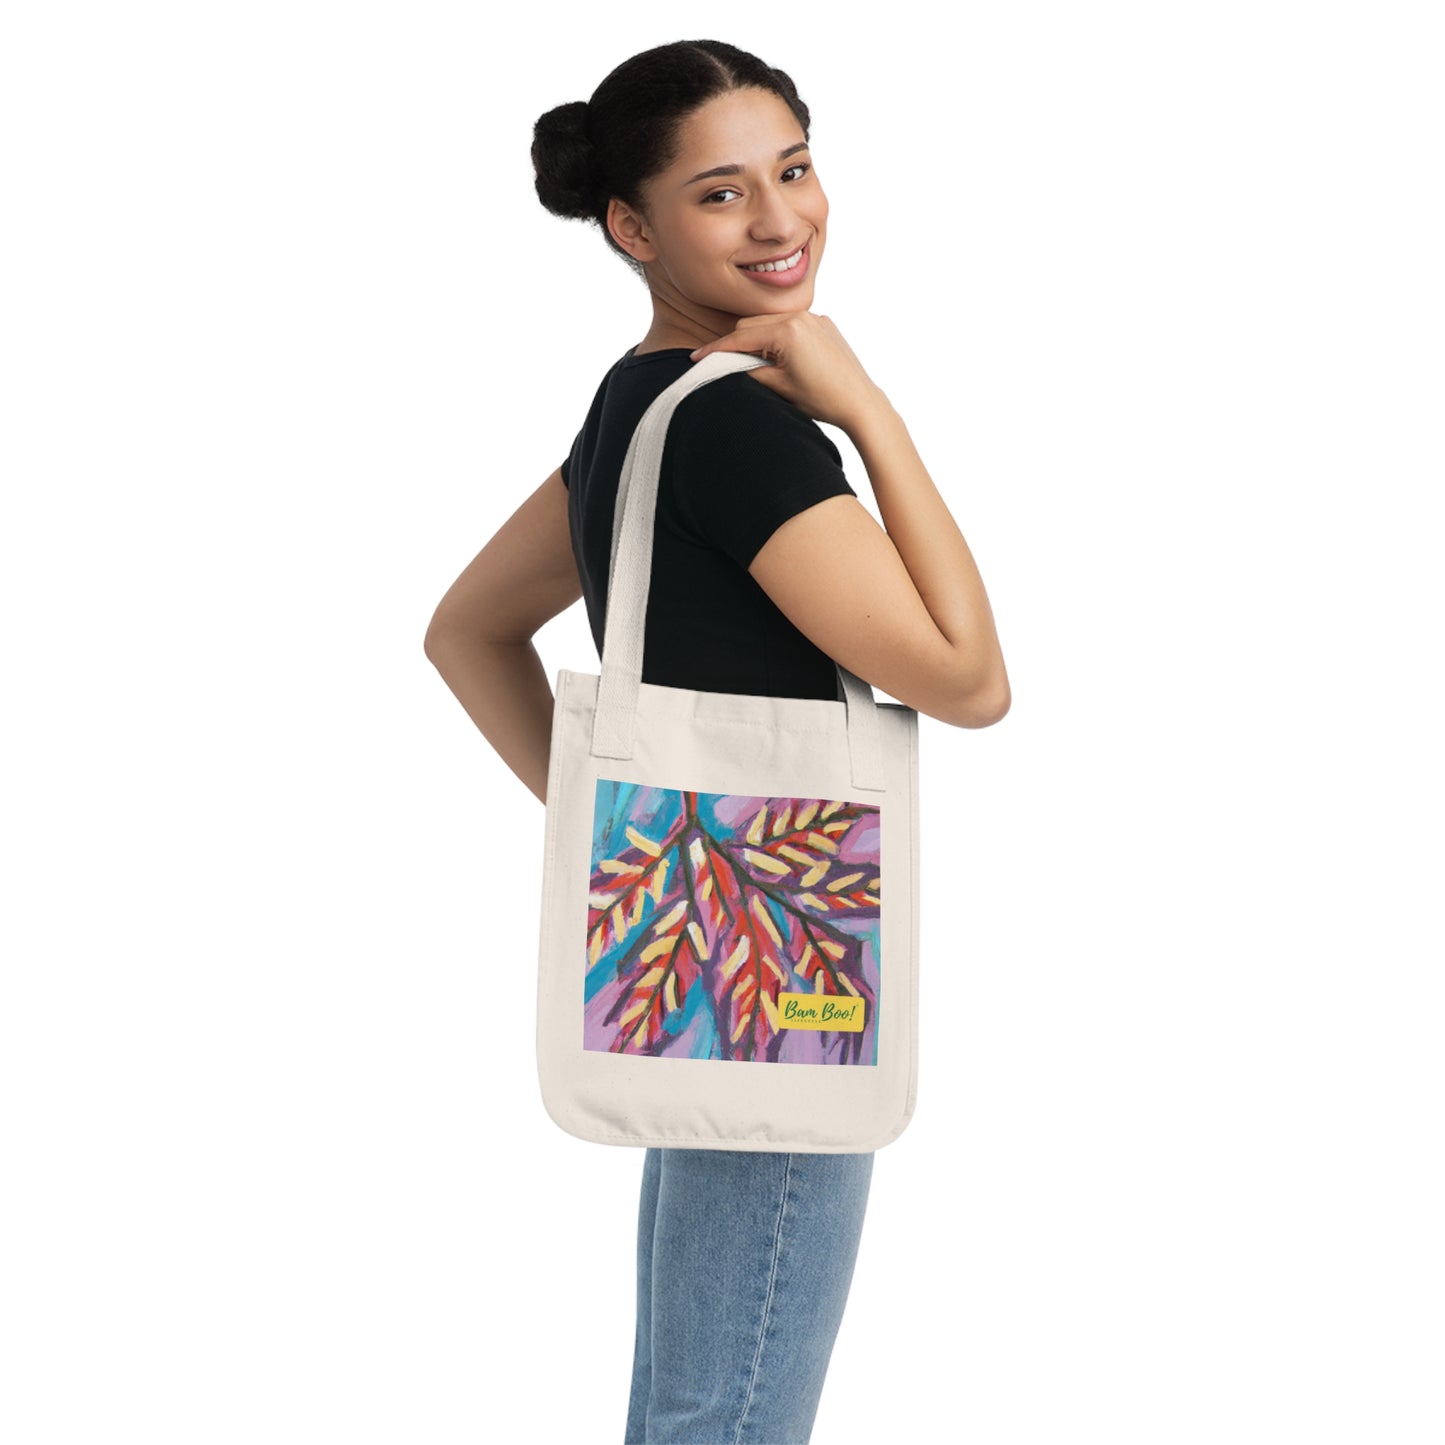 "Natural Reflections: Capturing Life Through Nature" - Bam Boo! Lifestyle Eco-friendly Tote Bag